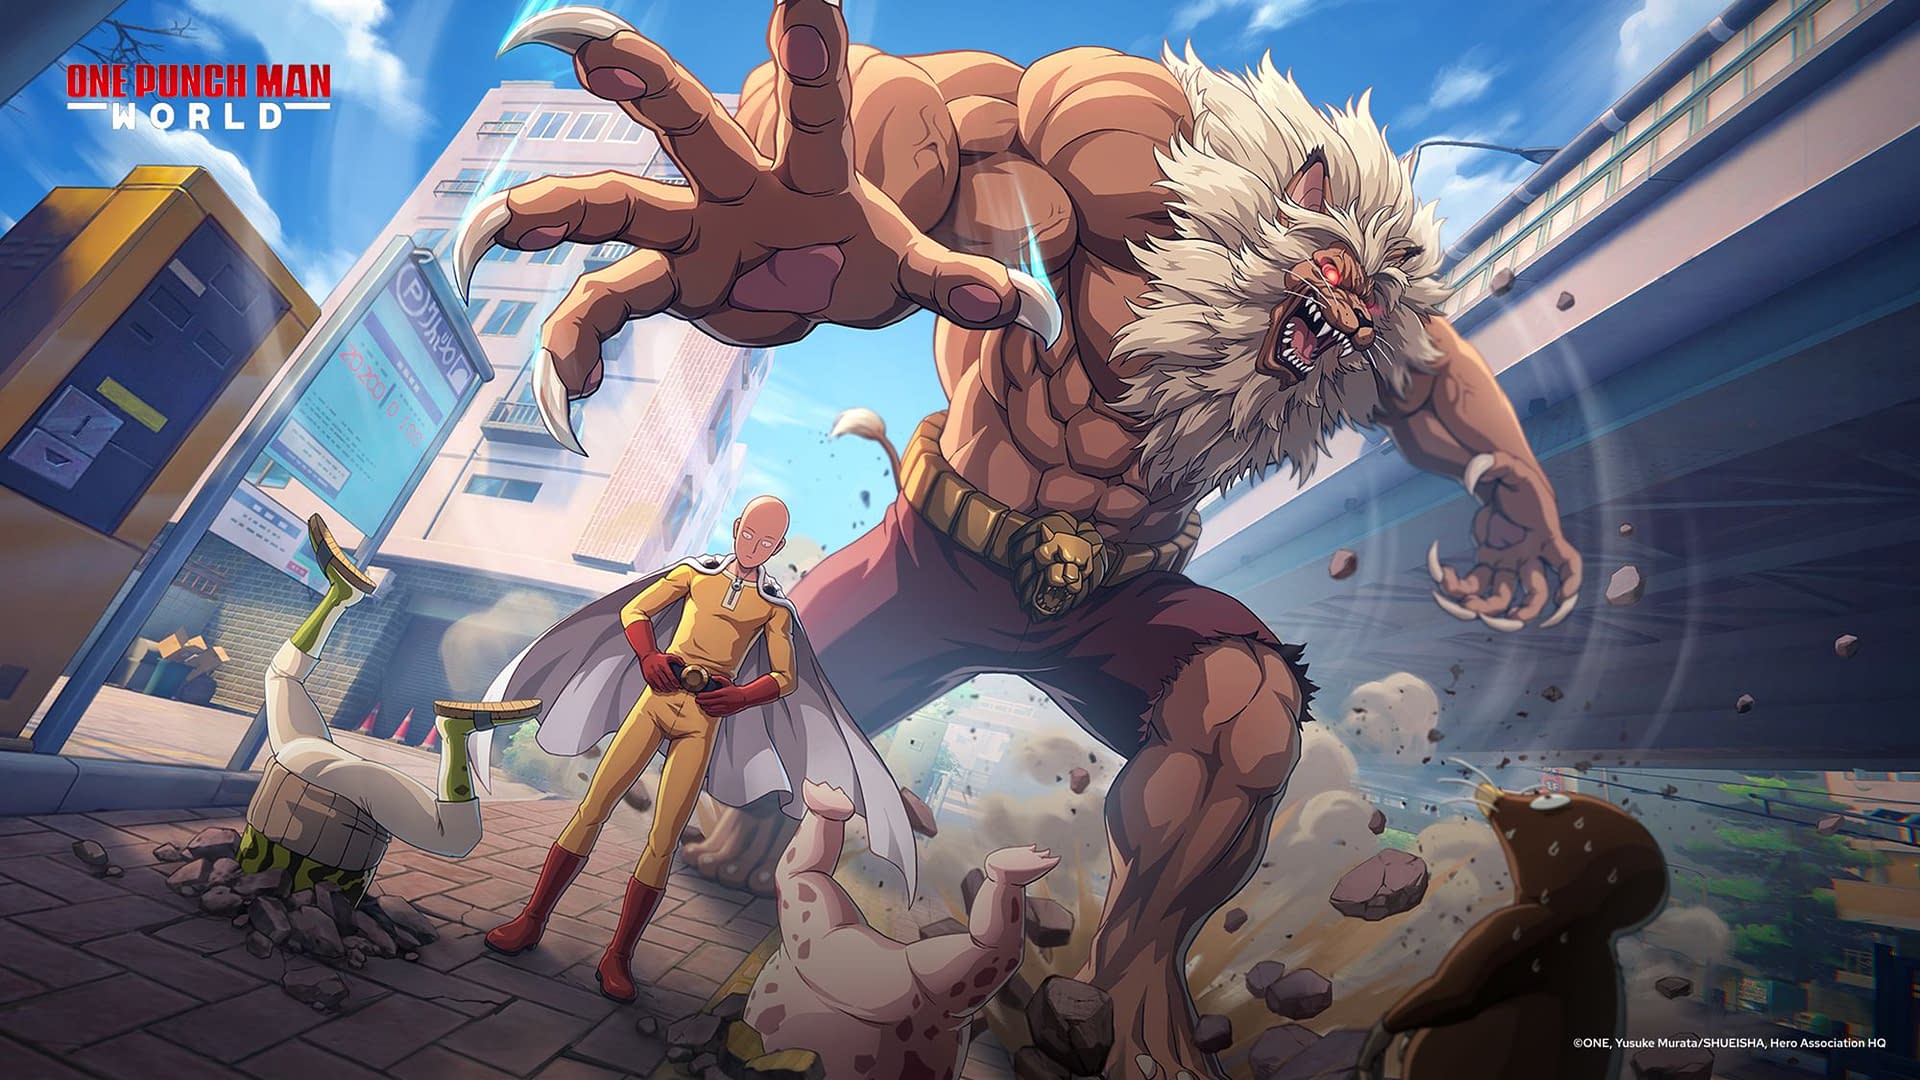 The ones I use. - Wallpaper  One punch man anime, One punch man, One punch